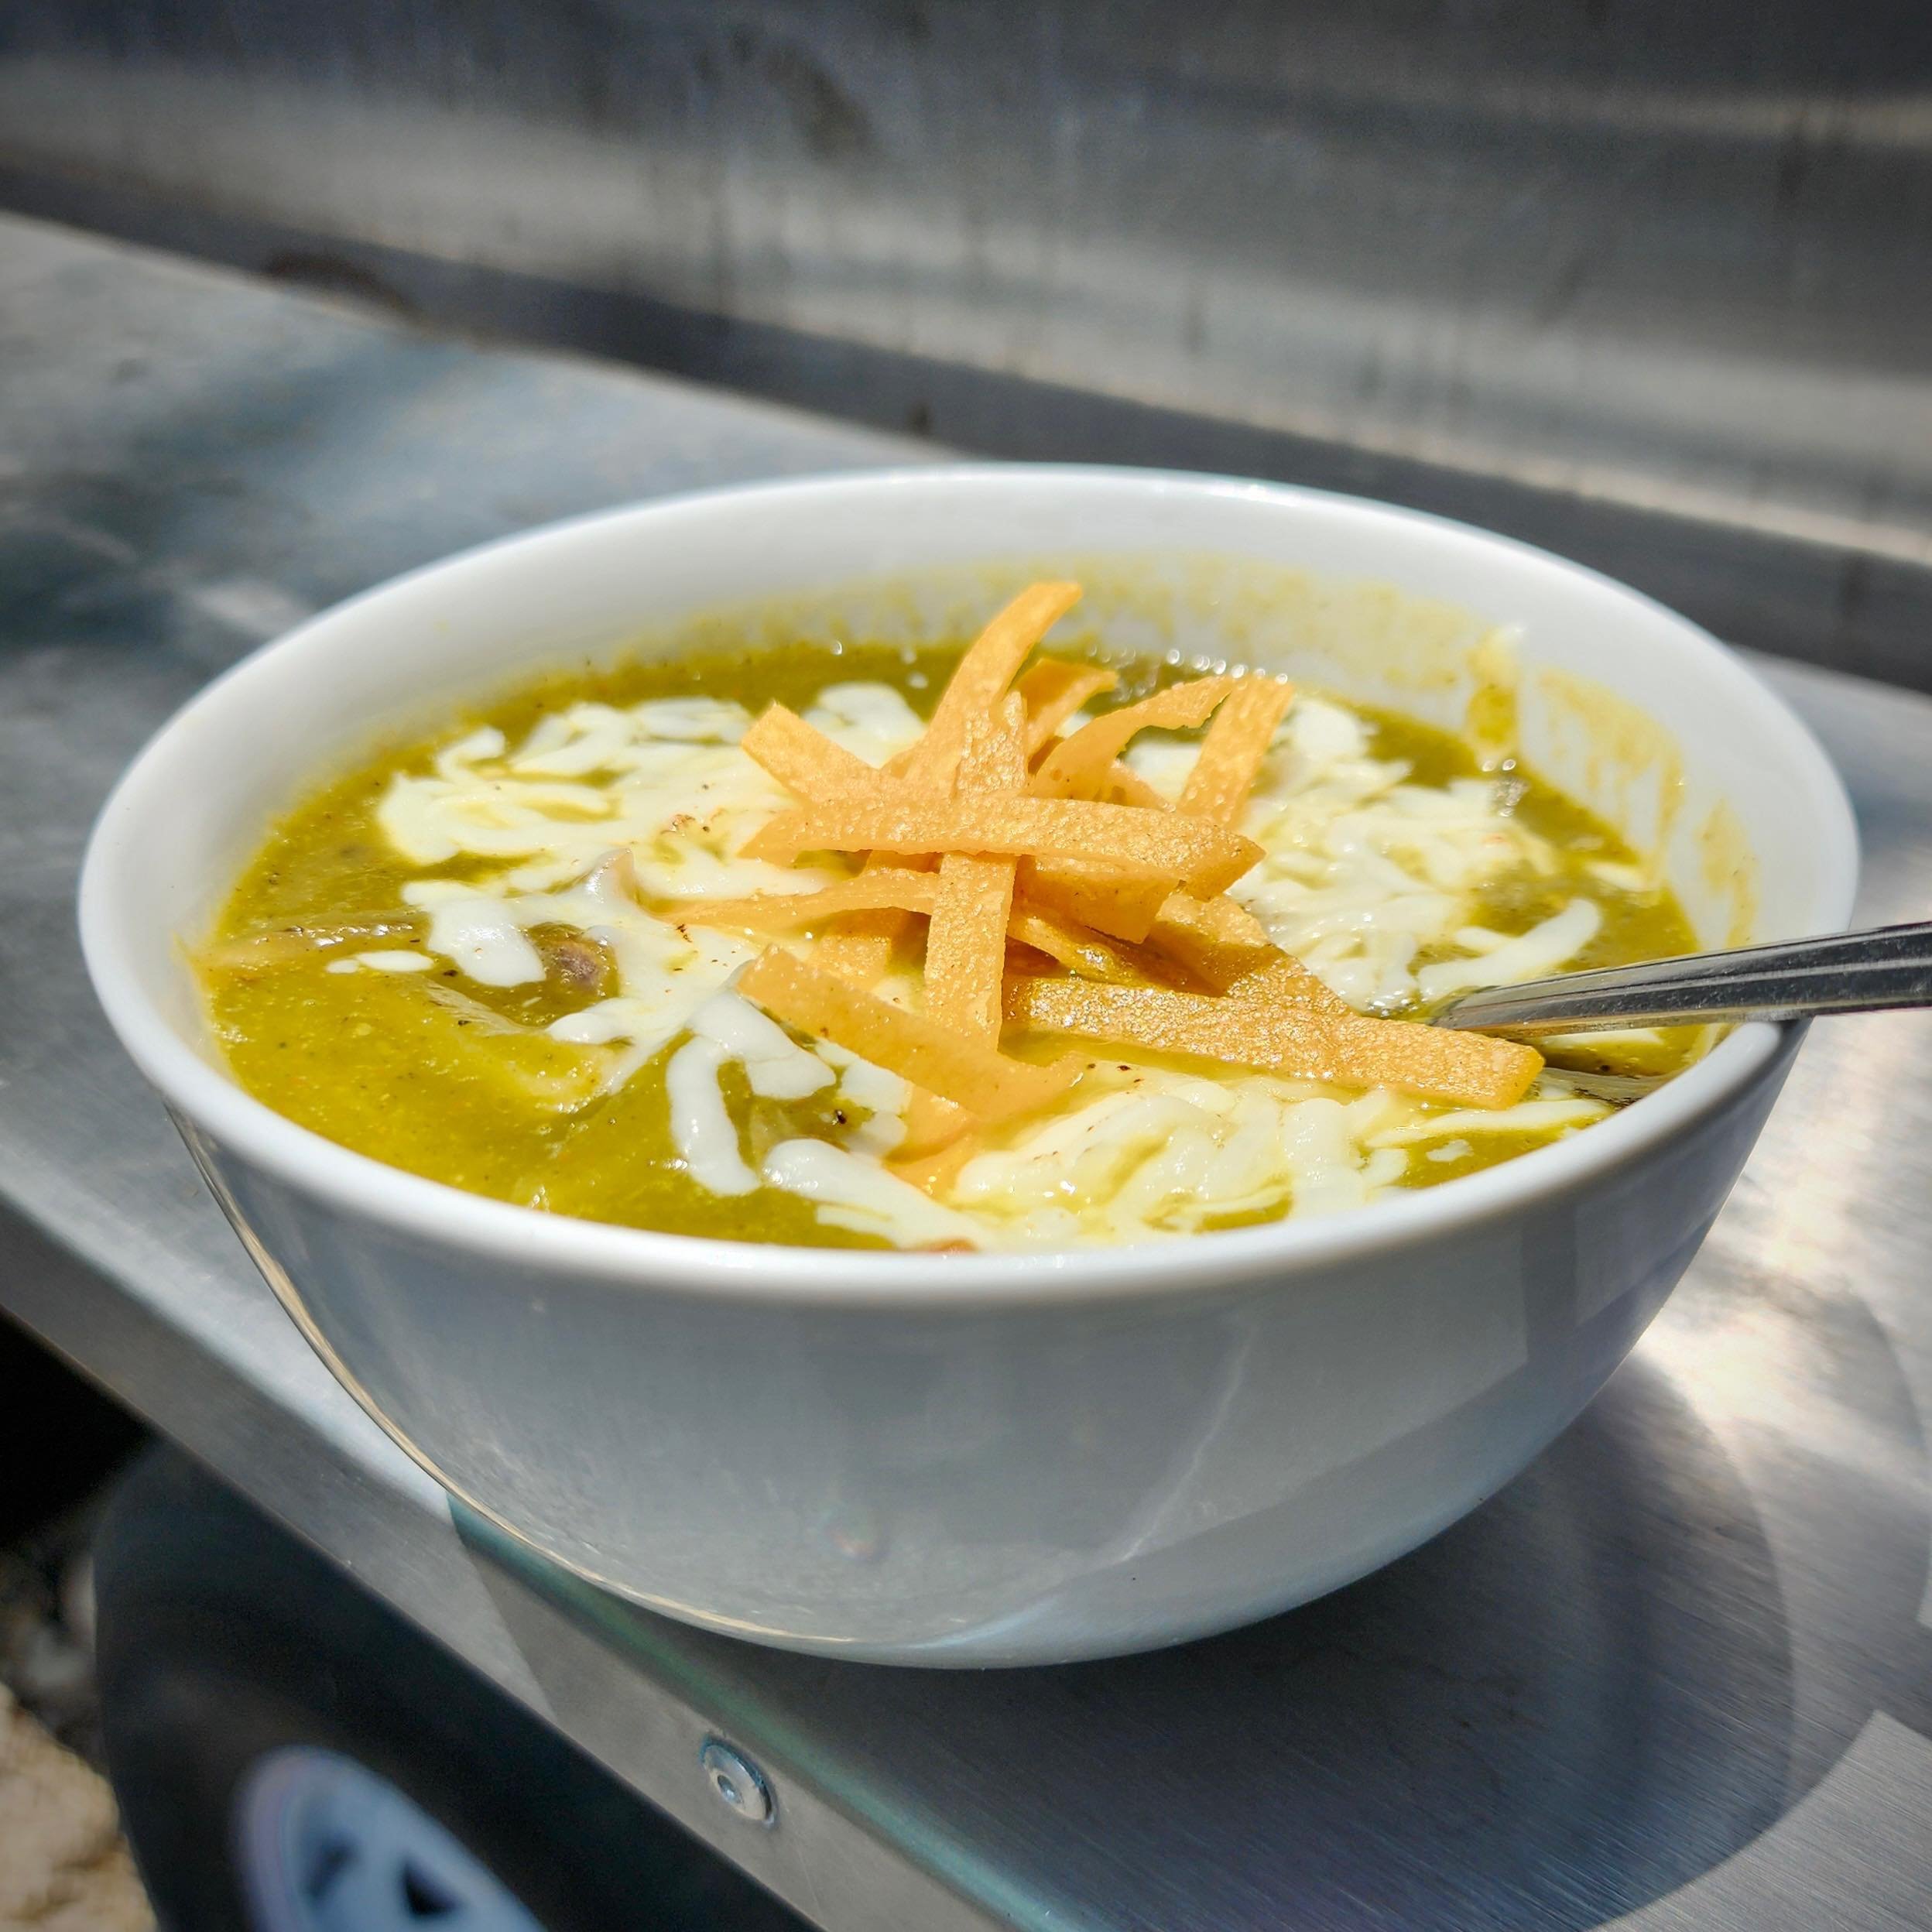 ✨Chile Relleno✨
Think chile Relleno deconstructed into a delicious filling soup! A blend of poblanos and anaheims with roasted peppers, onions, rajas, and topped with mozzarella cheese and tortilla strips🤤 Our soup of the week is Chile Relleno! Come